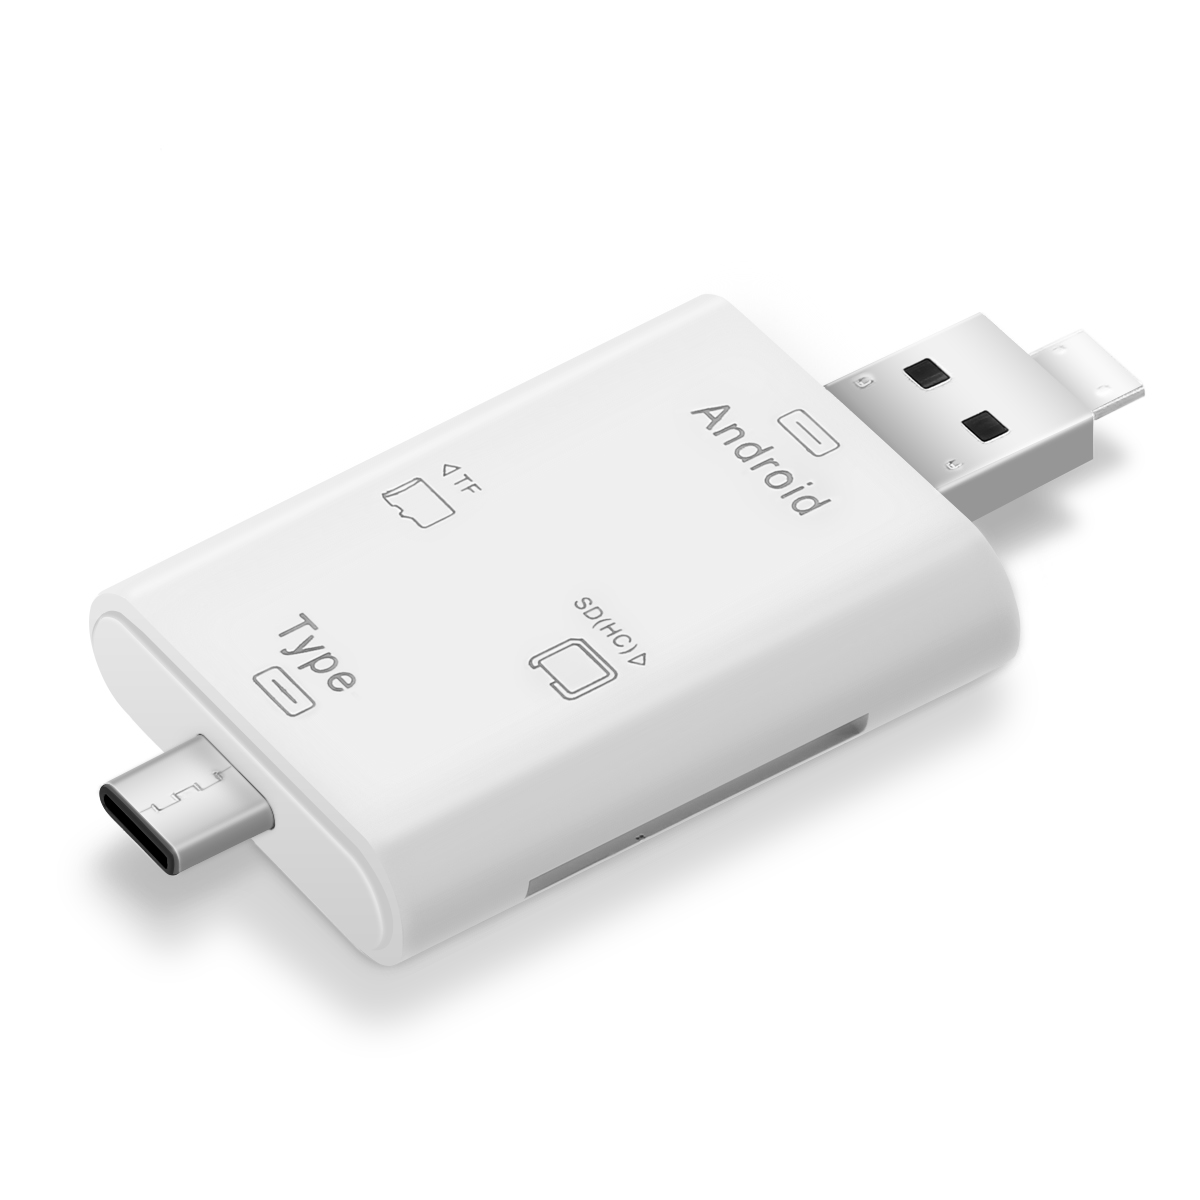 3-in-1-Multifunction-Card-Reader-Type-c-USB-Mirco-USB-Port-with-OTG-TF-SD-for-Mac-Android-Phone-1164250